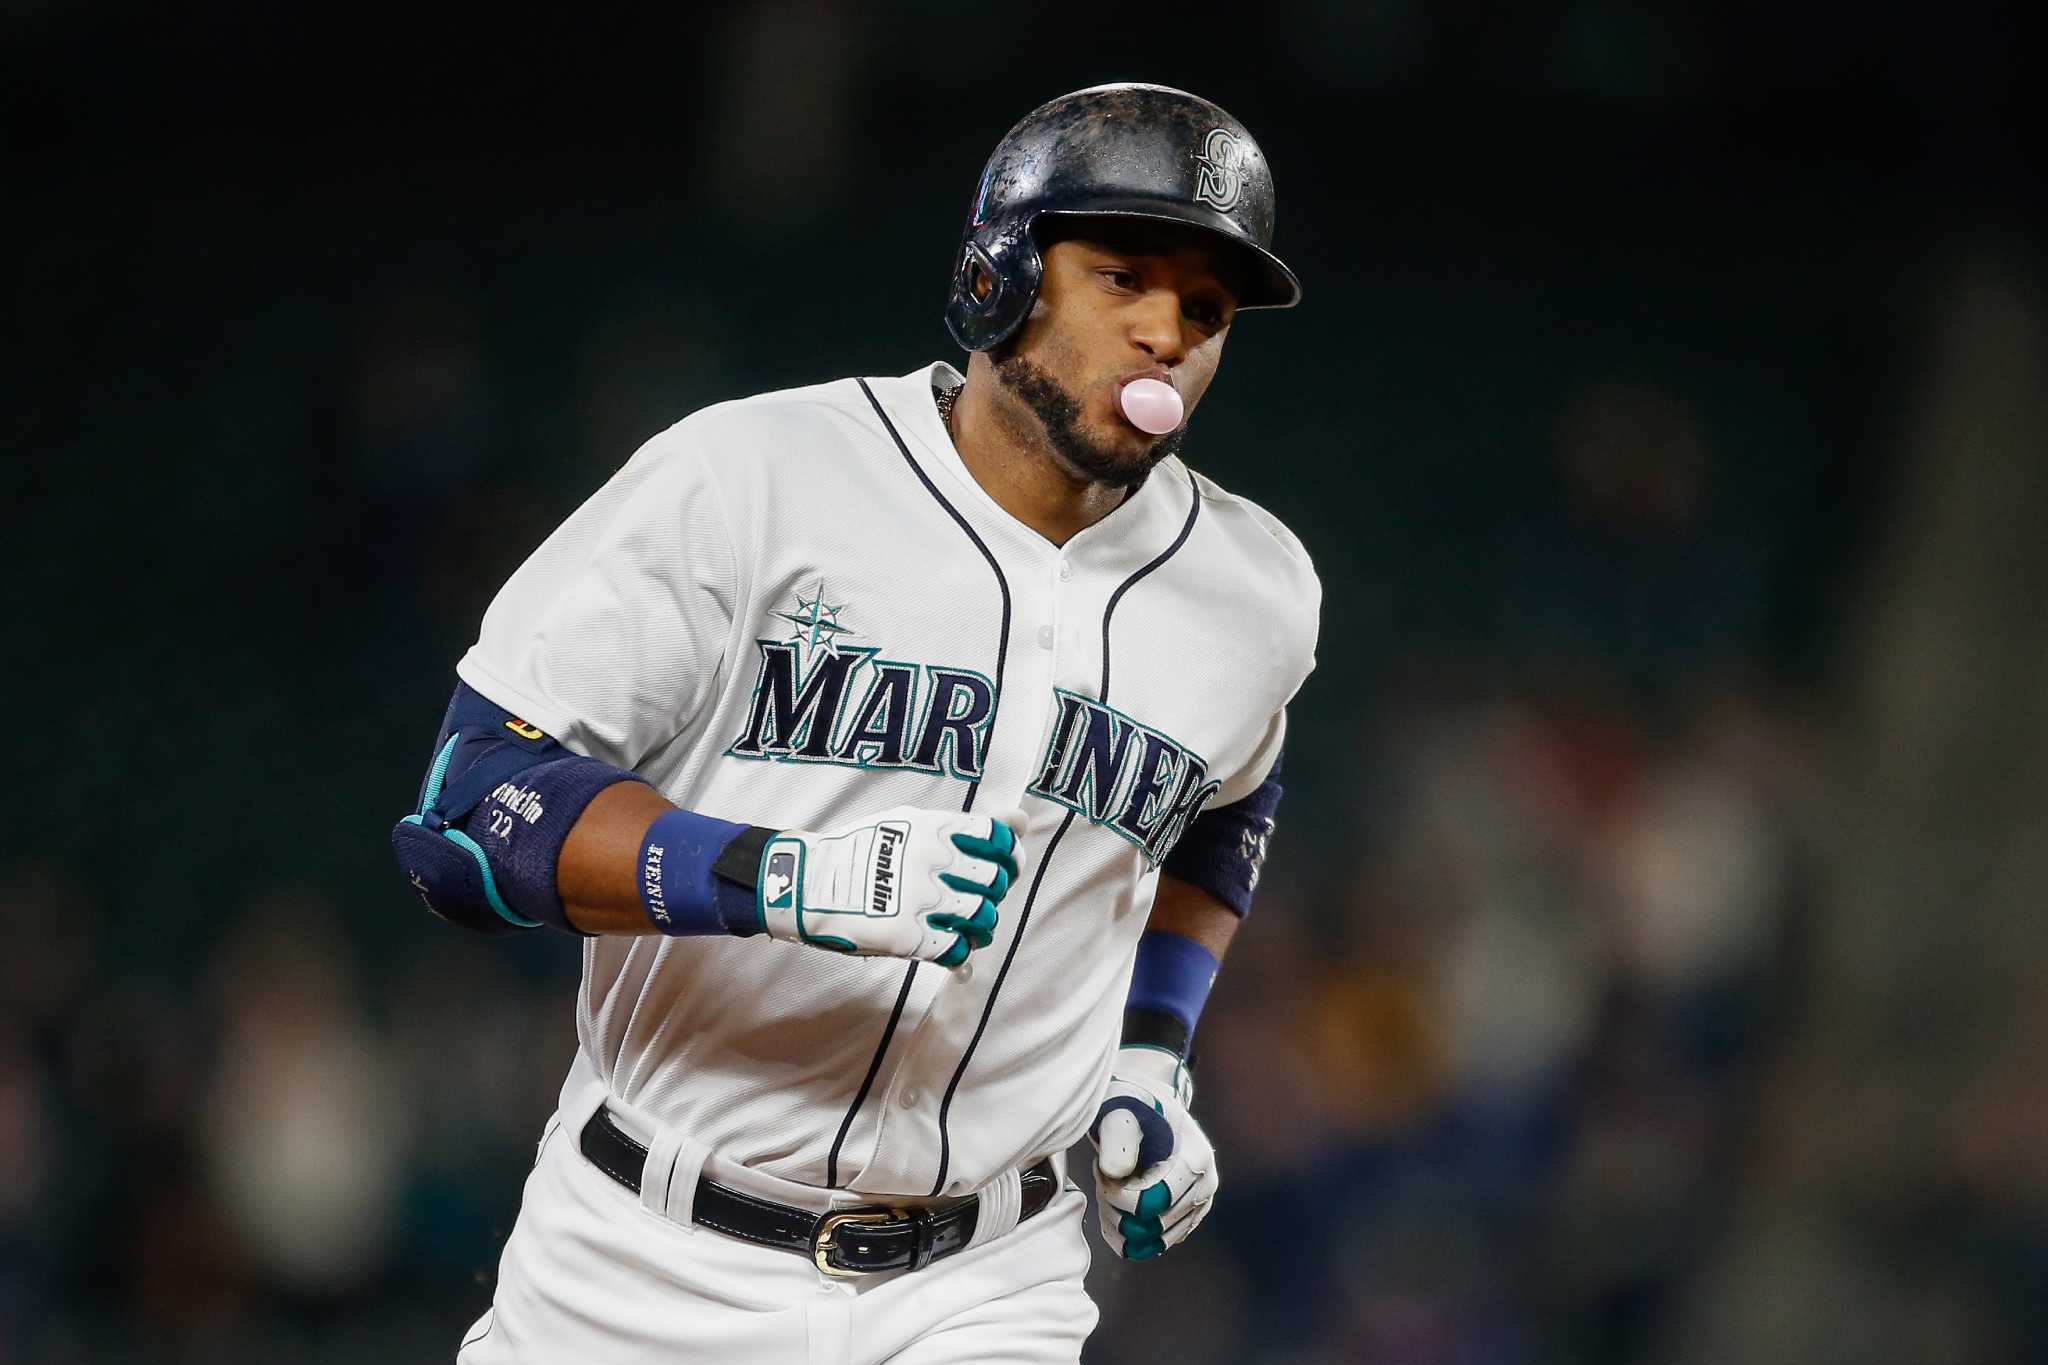 Ex-M's coach Van Slyke: 'Coaches got fired because of Cano